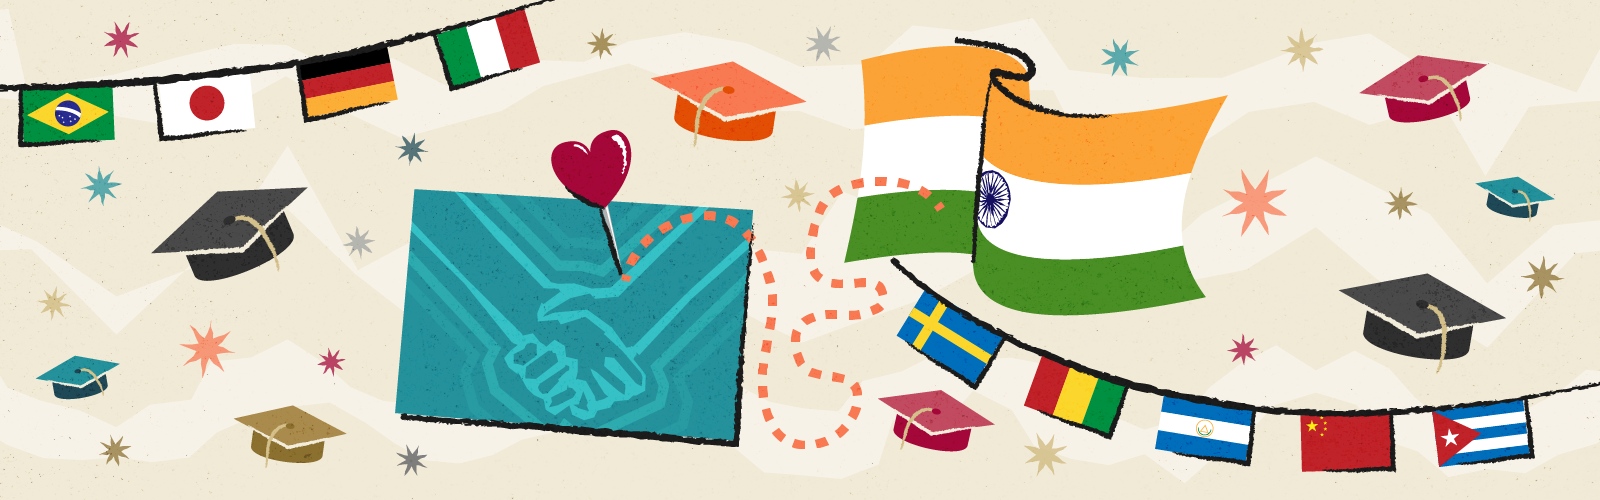 Graphic of Colorado and India's flag, surrounded by graduation caps, stars, and other world flags